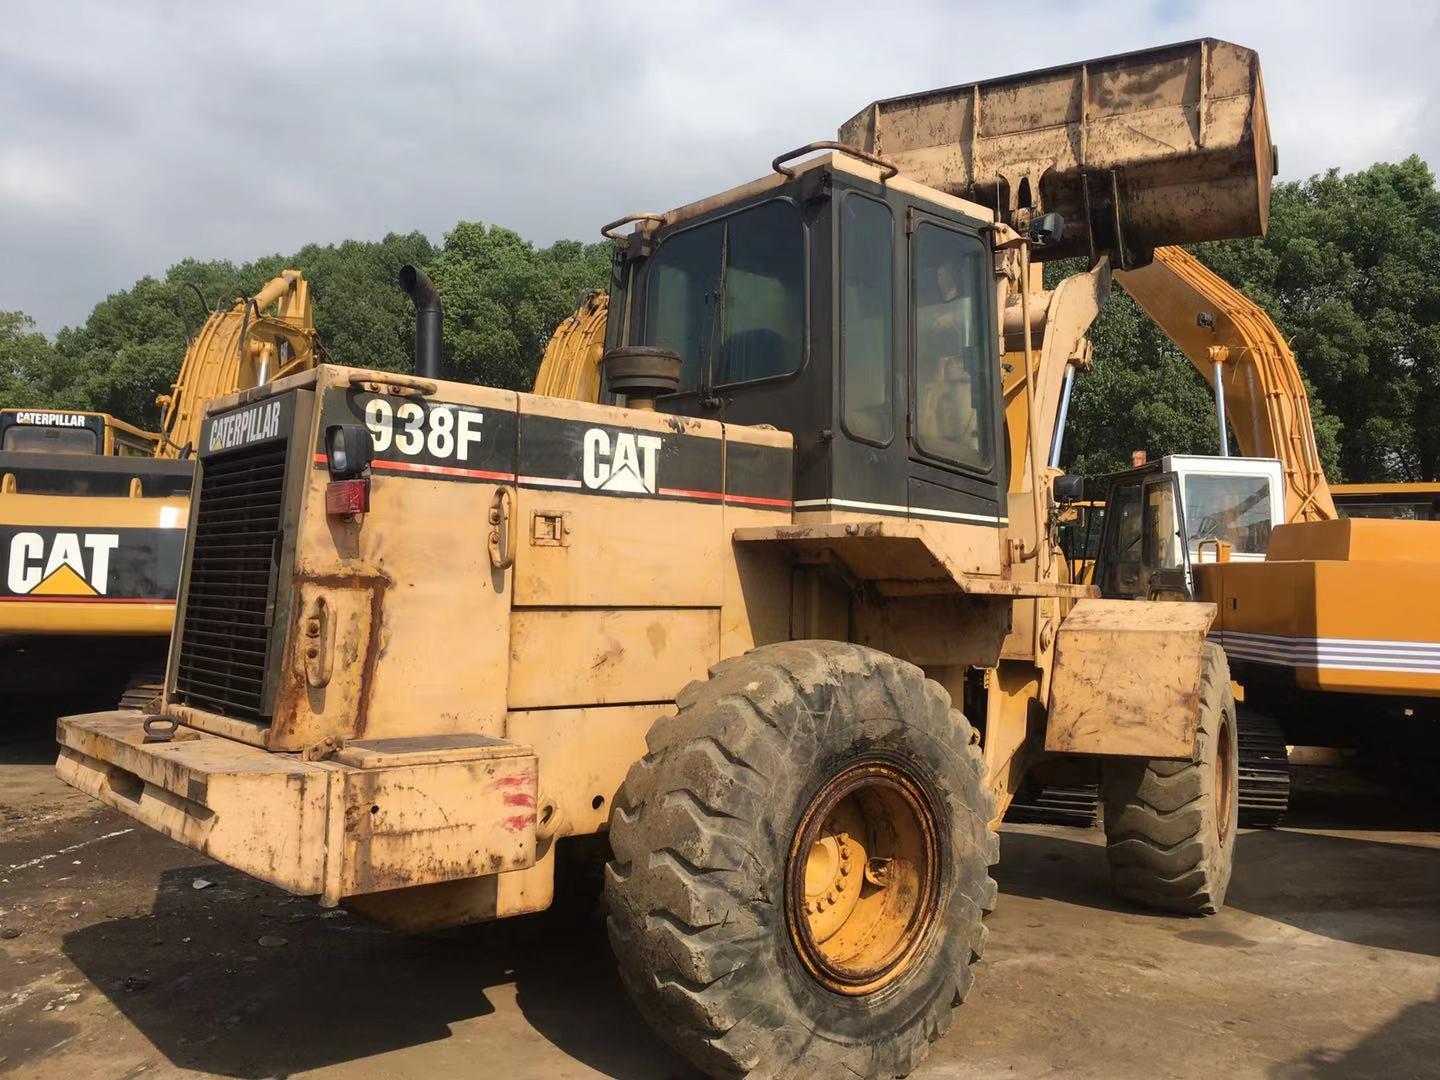 Used/Secondhadn Caterpillar 938f Wheel Loader with High Quality in Cheap Price